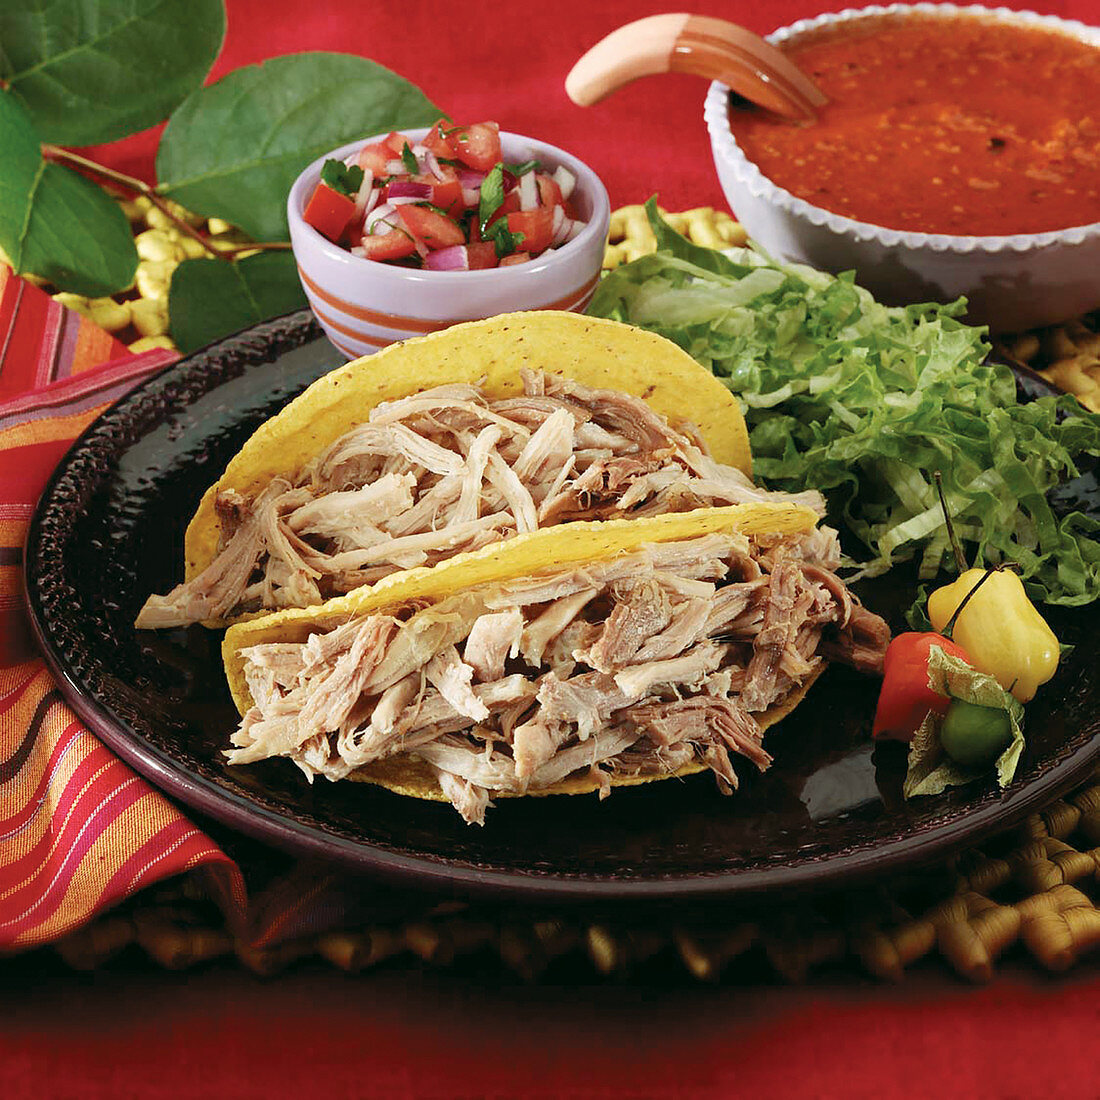 Pork carnitas in a crispy corn taco shell garnished with tomatillo, peppers, shredded lettuce and tomato salsa